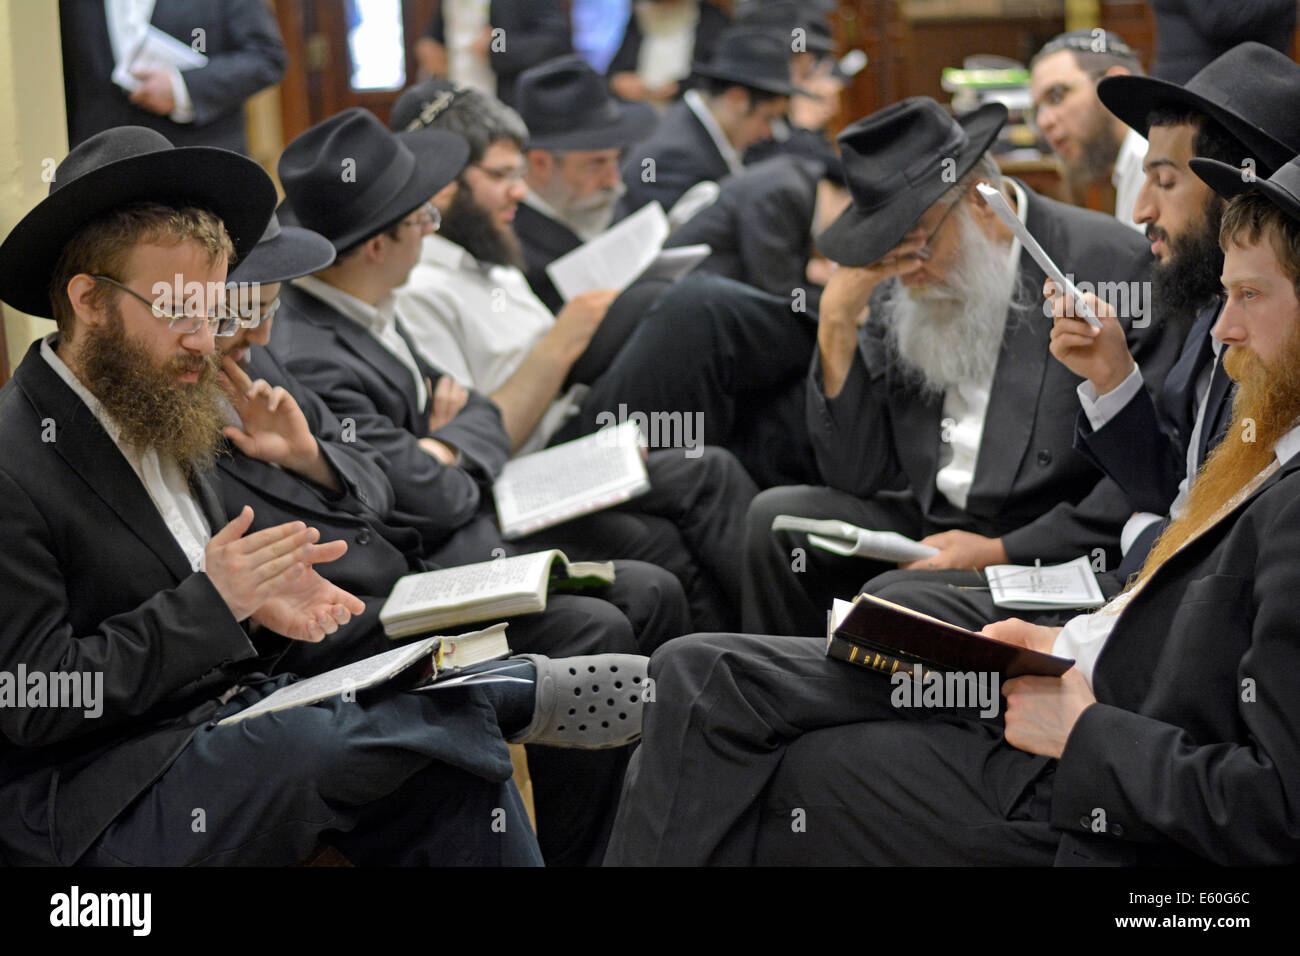 Young Jewish men praying during Tisha B'Av services in a synagogue in Brooklyn, New York, USA Stock Photo